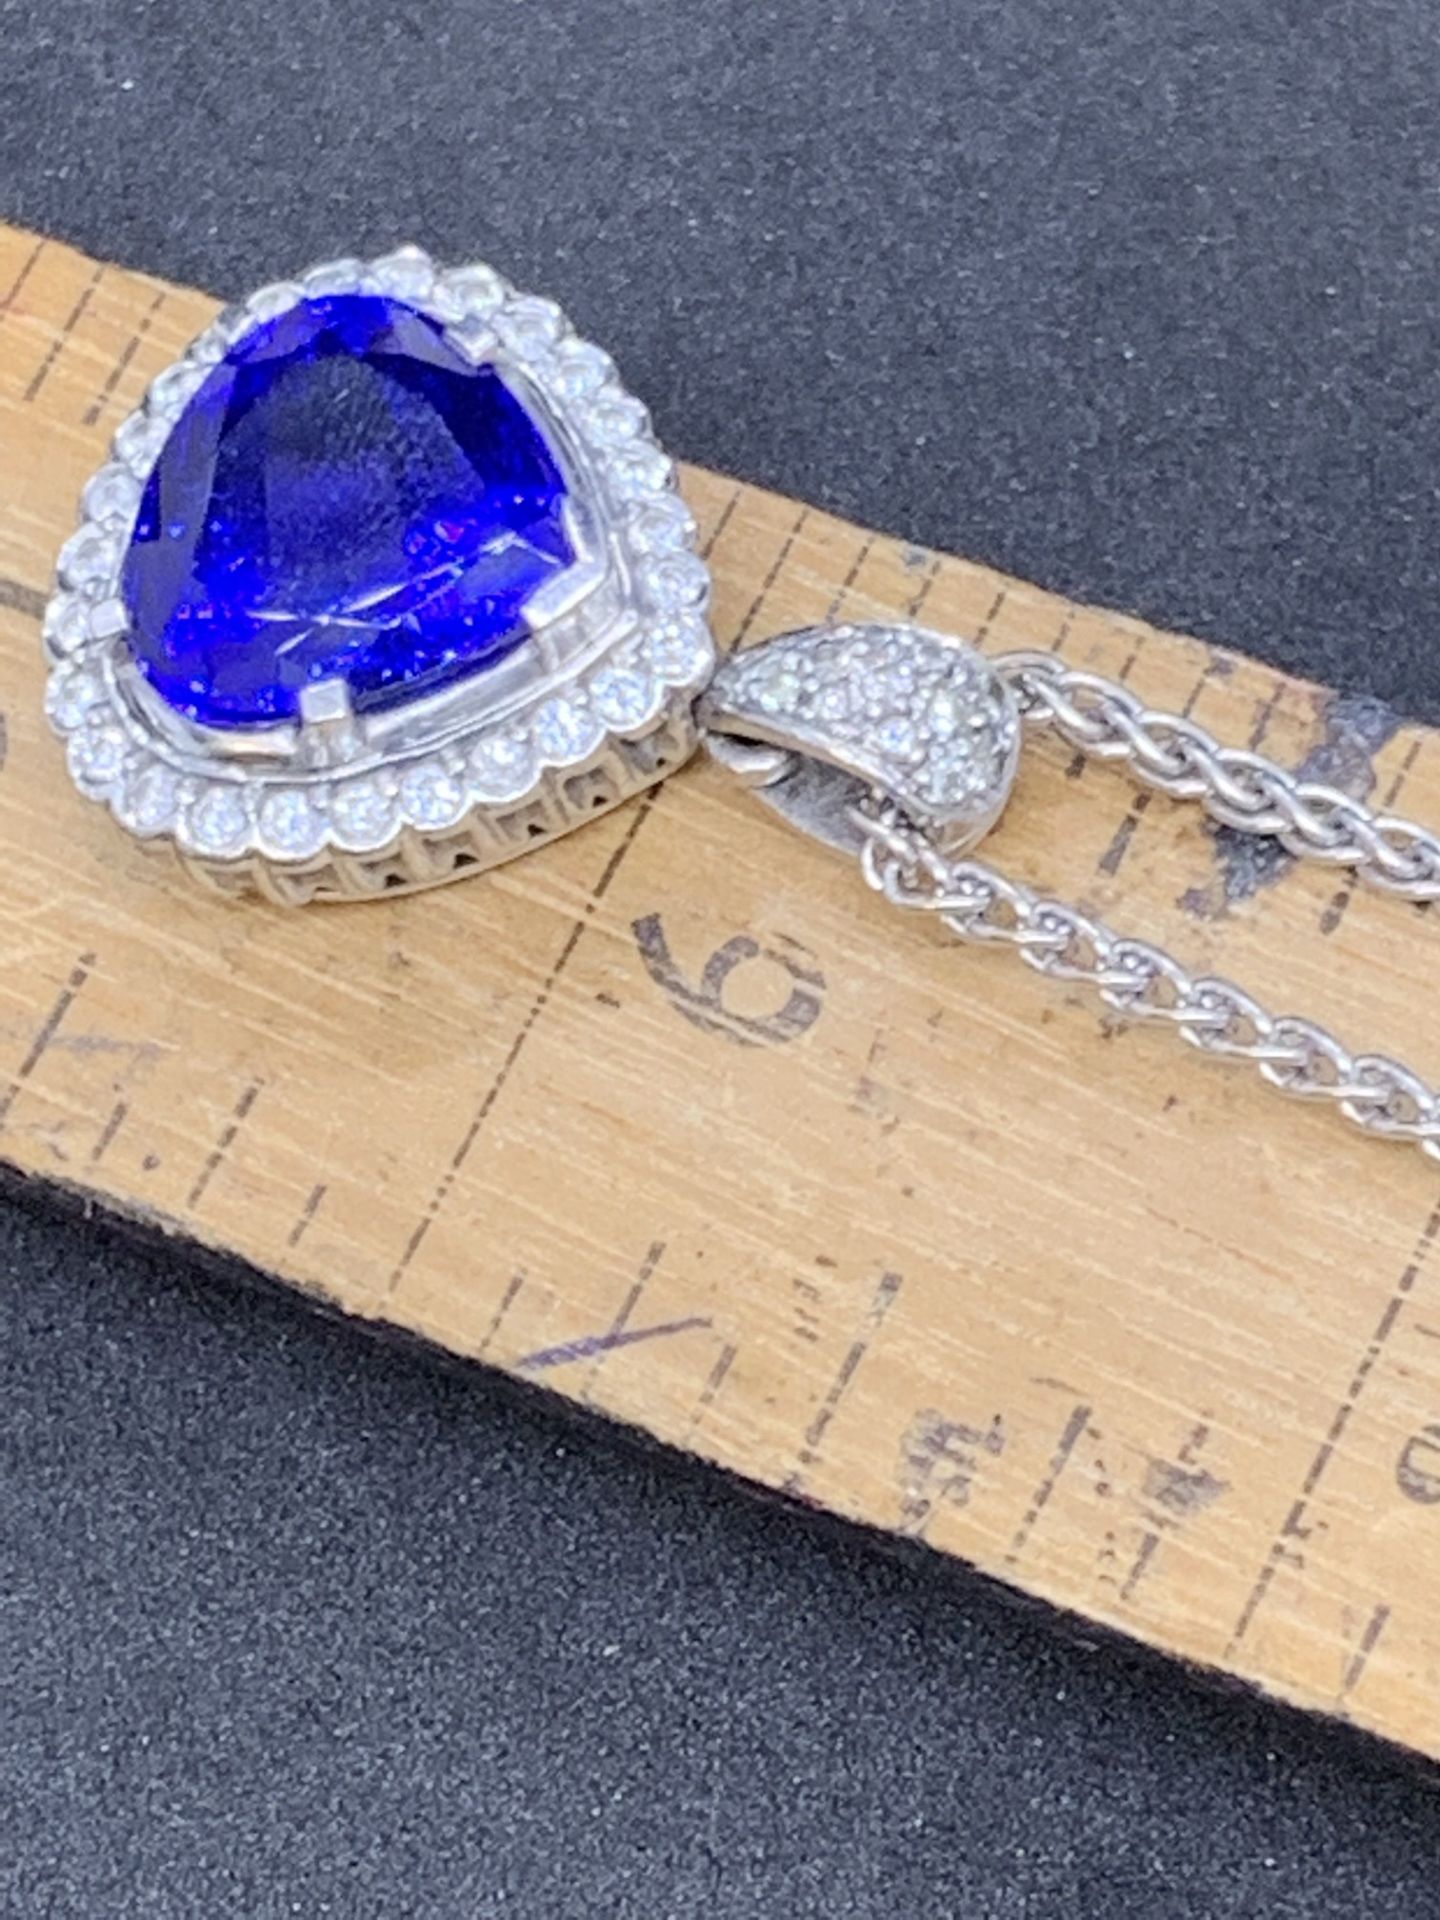 18 carat gold 7ct Tanzanite and one carat diamond heart pendant and chain Approximately 19.4 g - Image 10 of 10